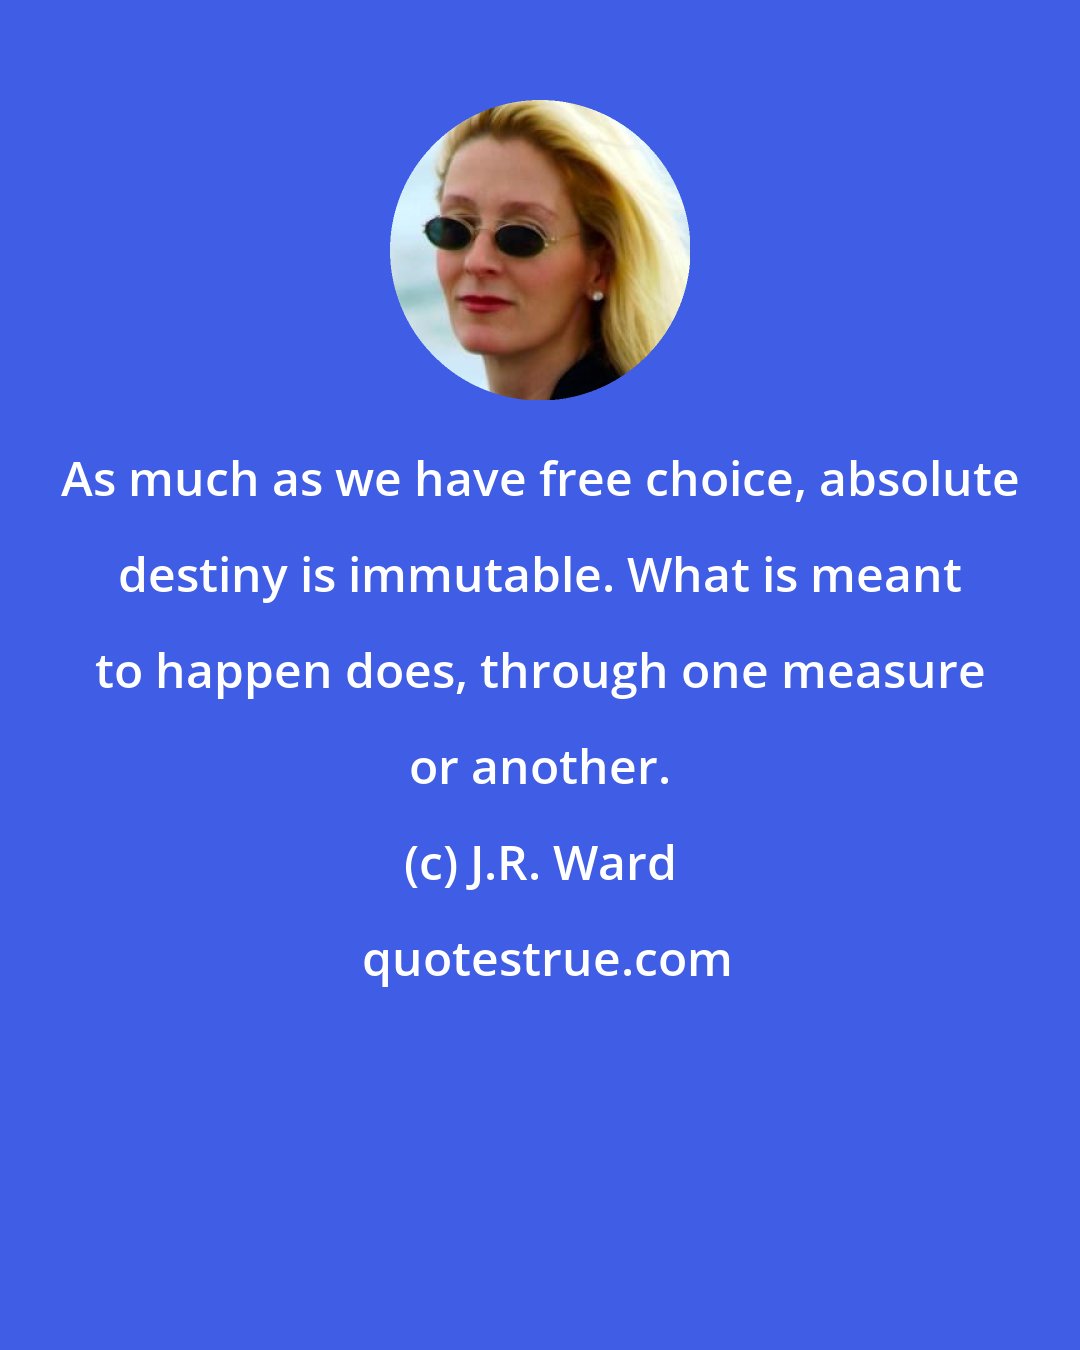 J.R. Ward: As much as we have free choice, absolute destiny is immutable. What is meant to happen does, through one measure or another.